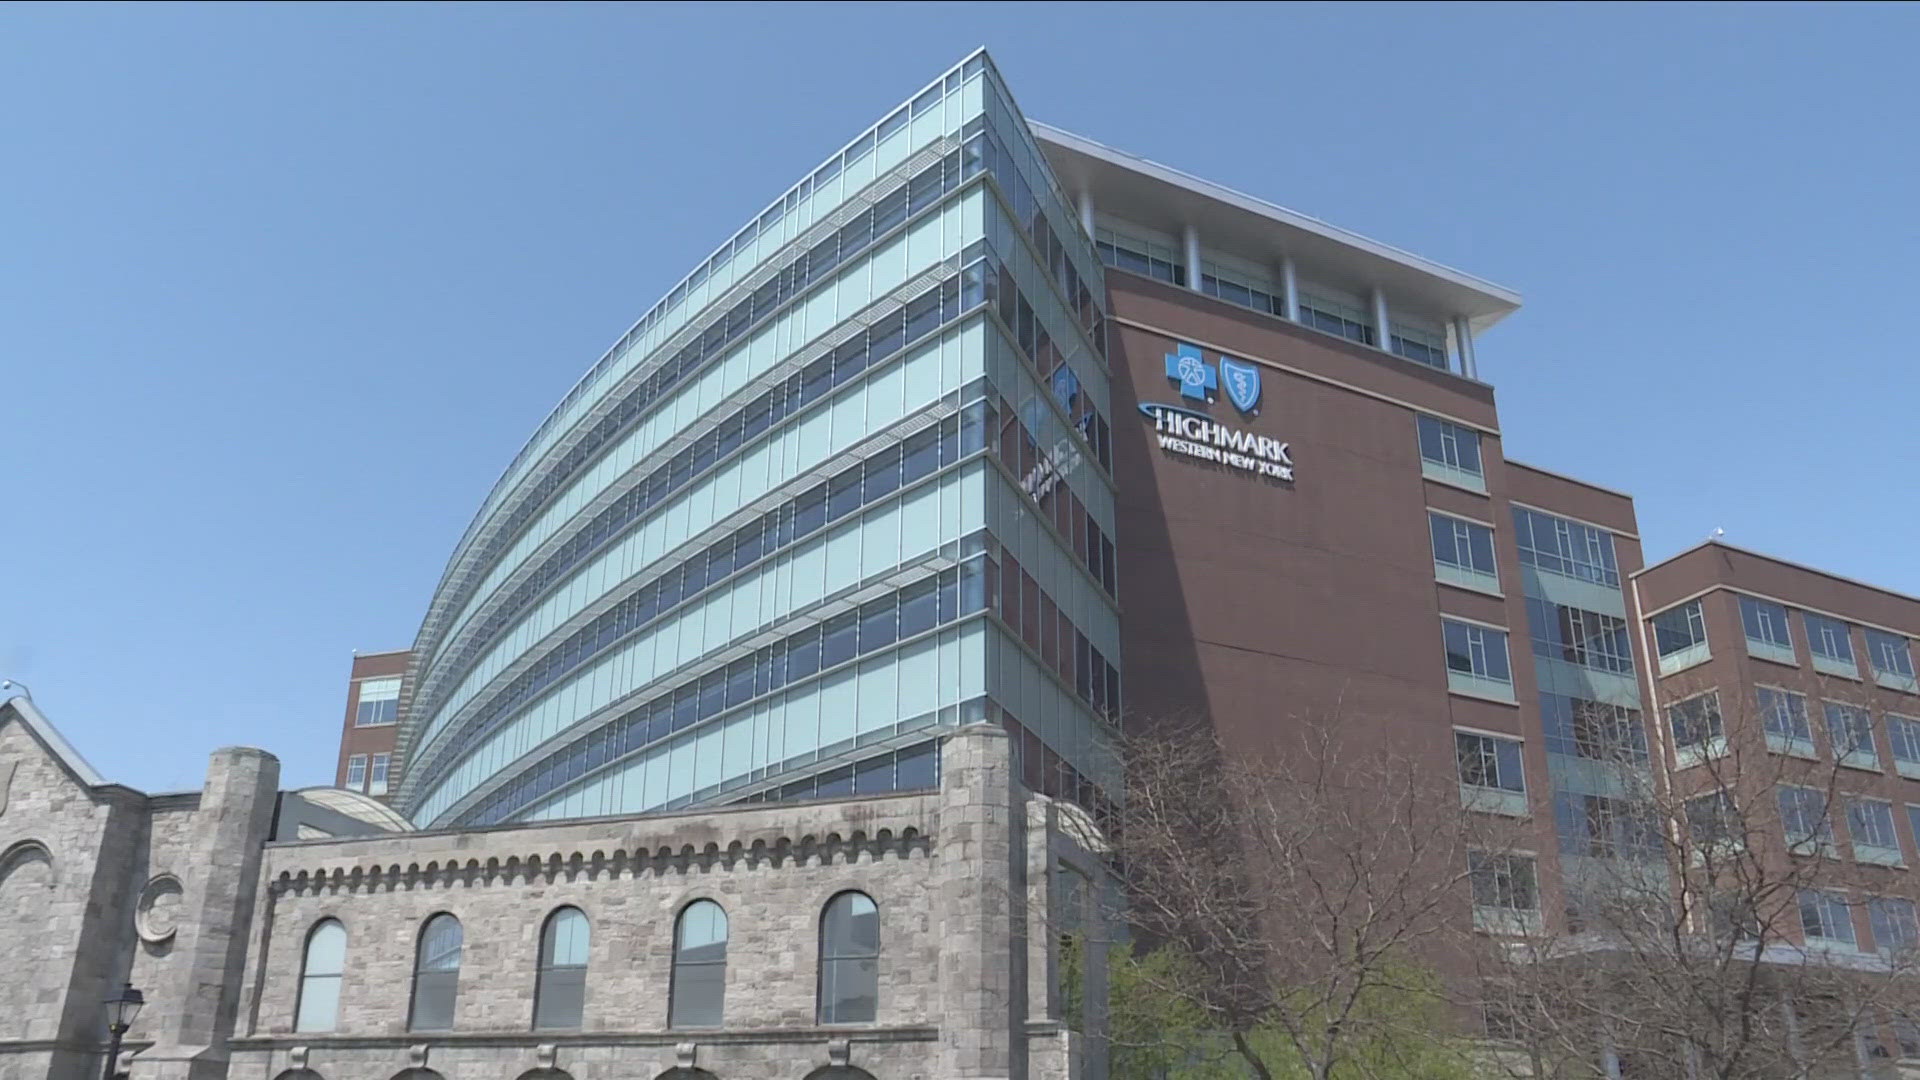 Another seven Buffalo employees received layoff notices May 23 as Highmark Inc. continues to shed employees across its footprint.